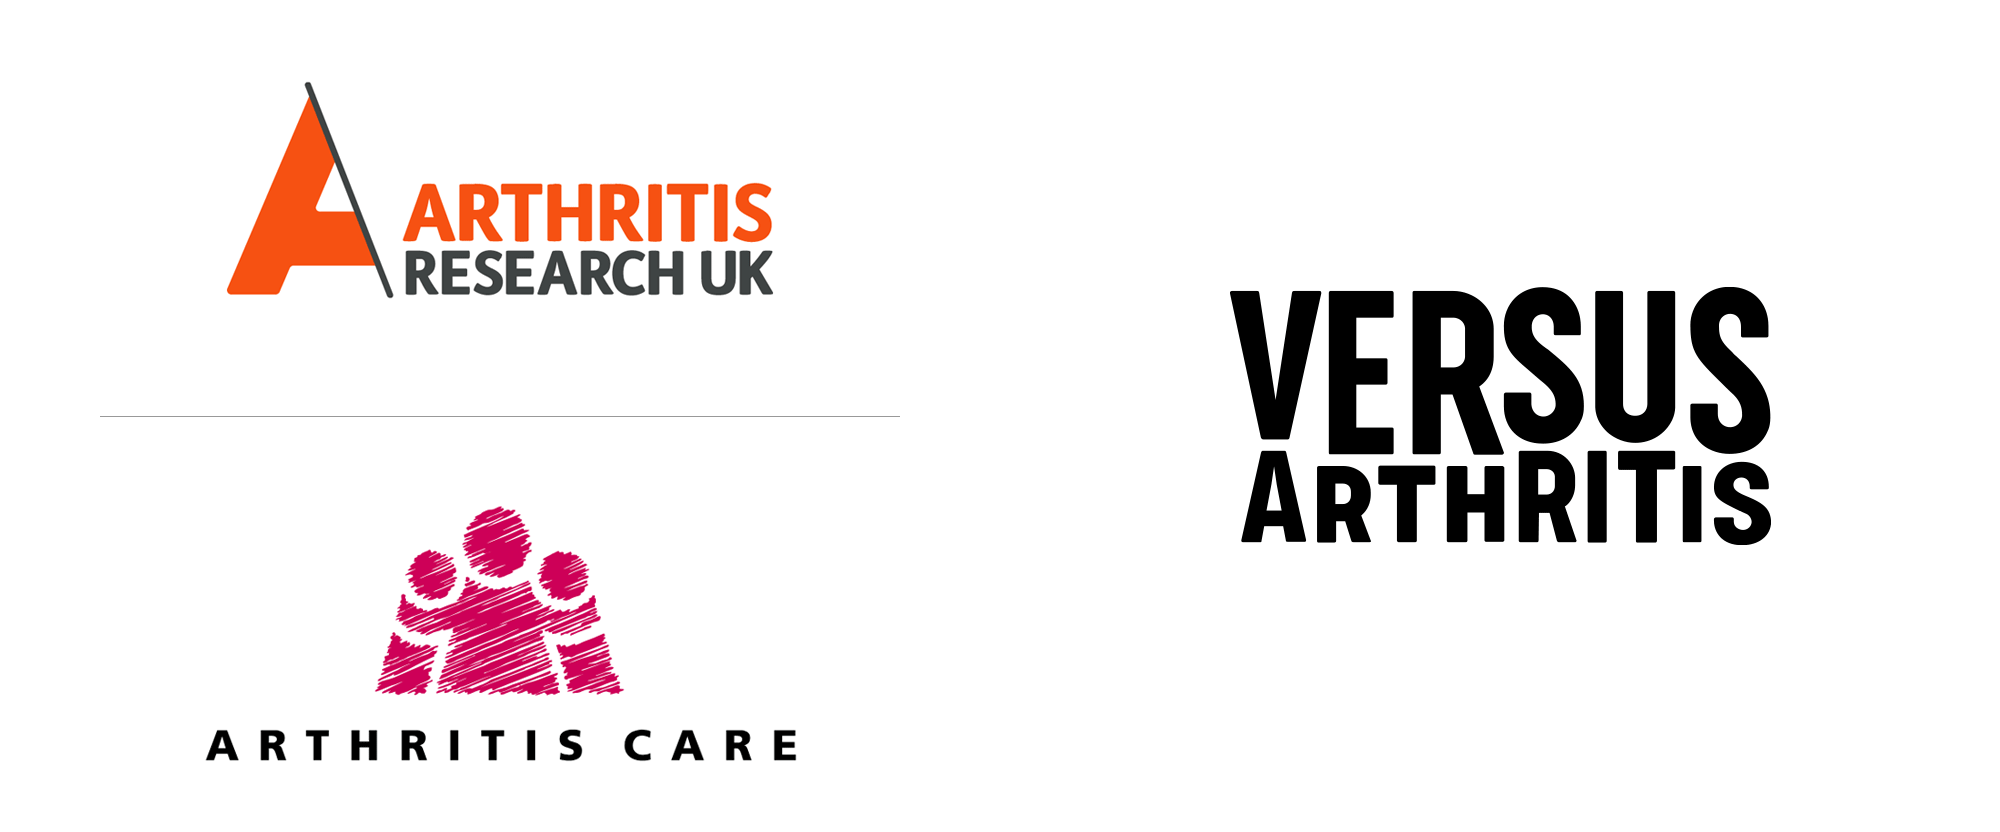 New Name, Logo, and Identity for Versus Arthritis by Re